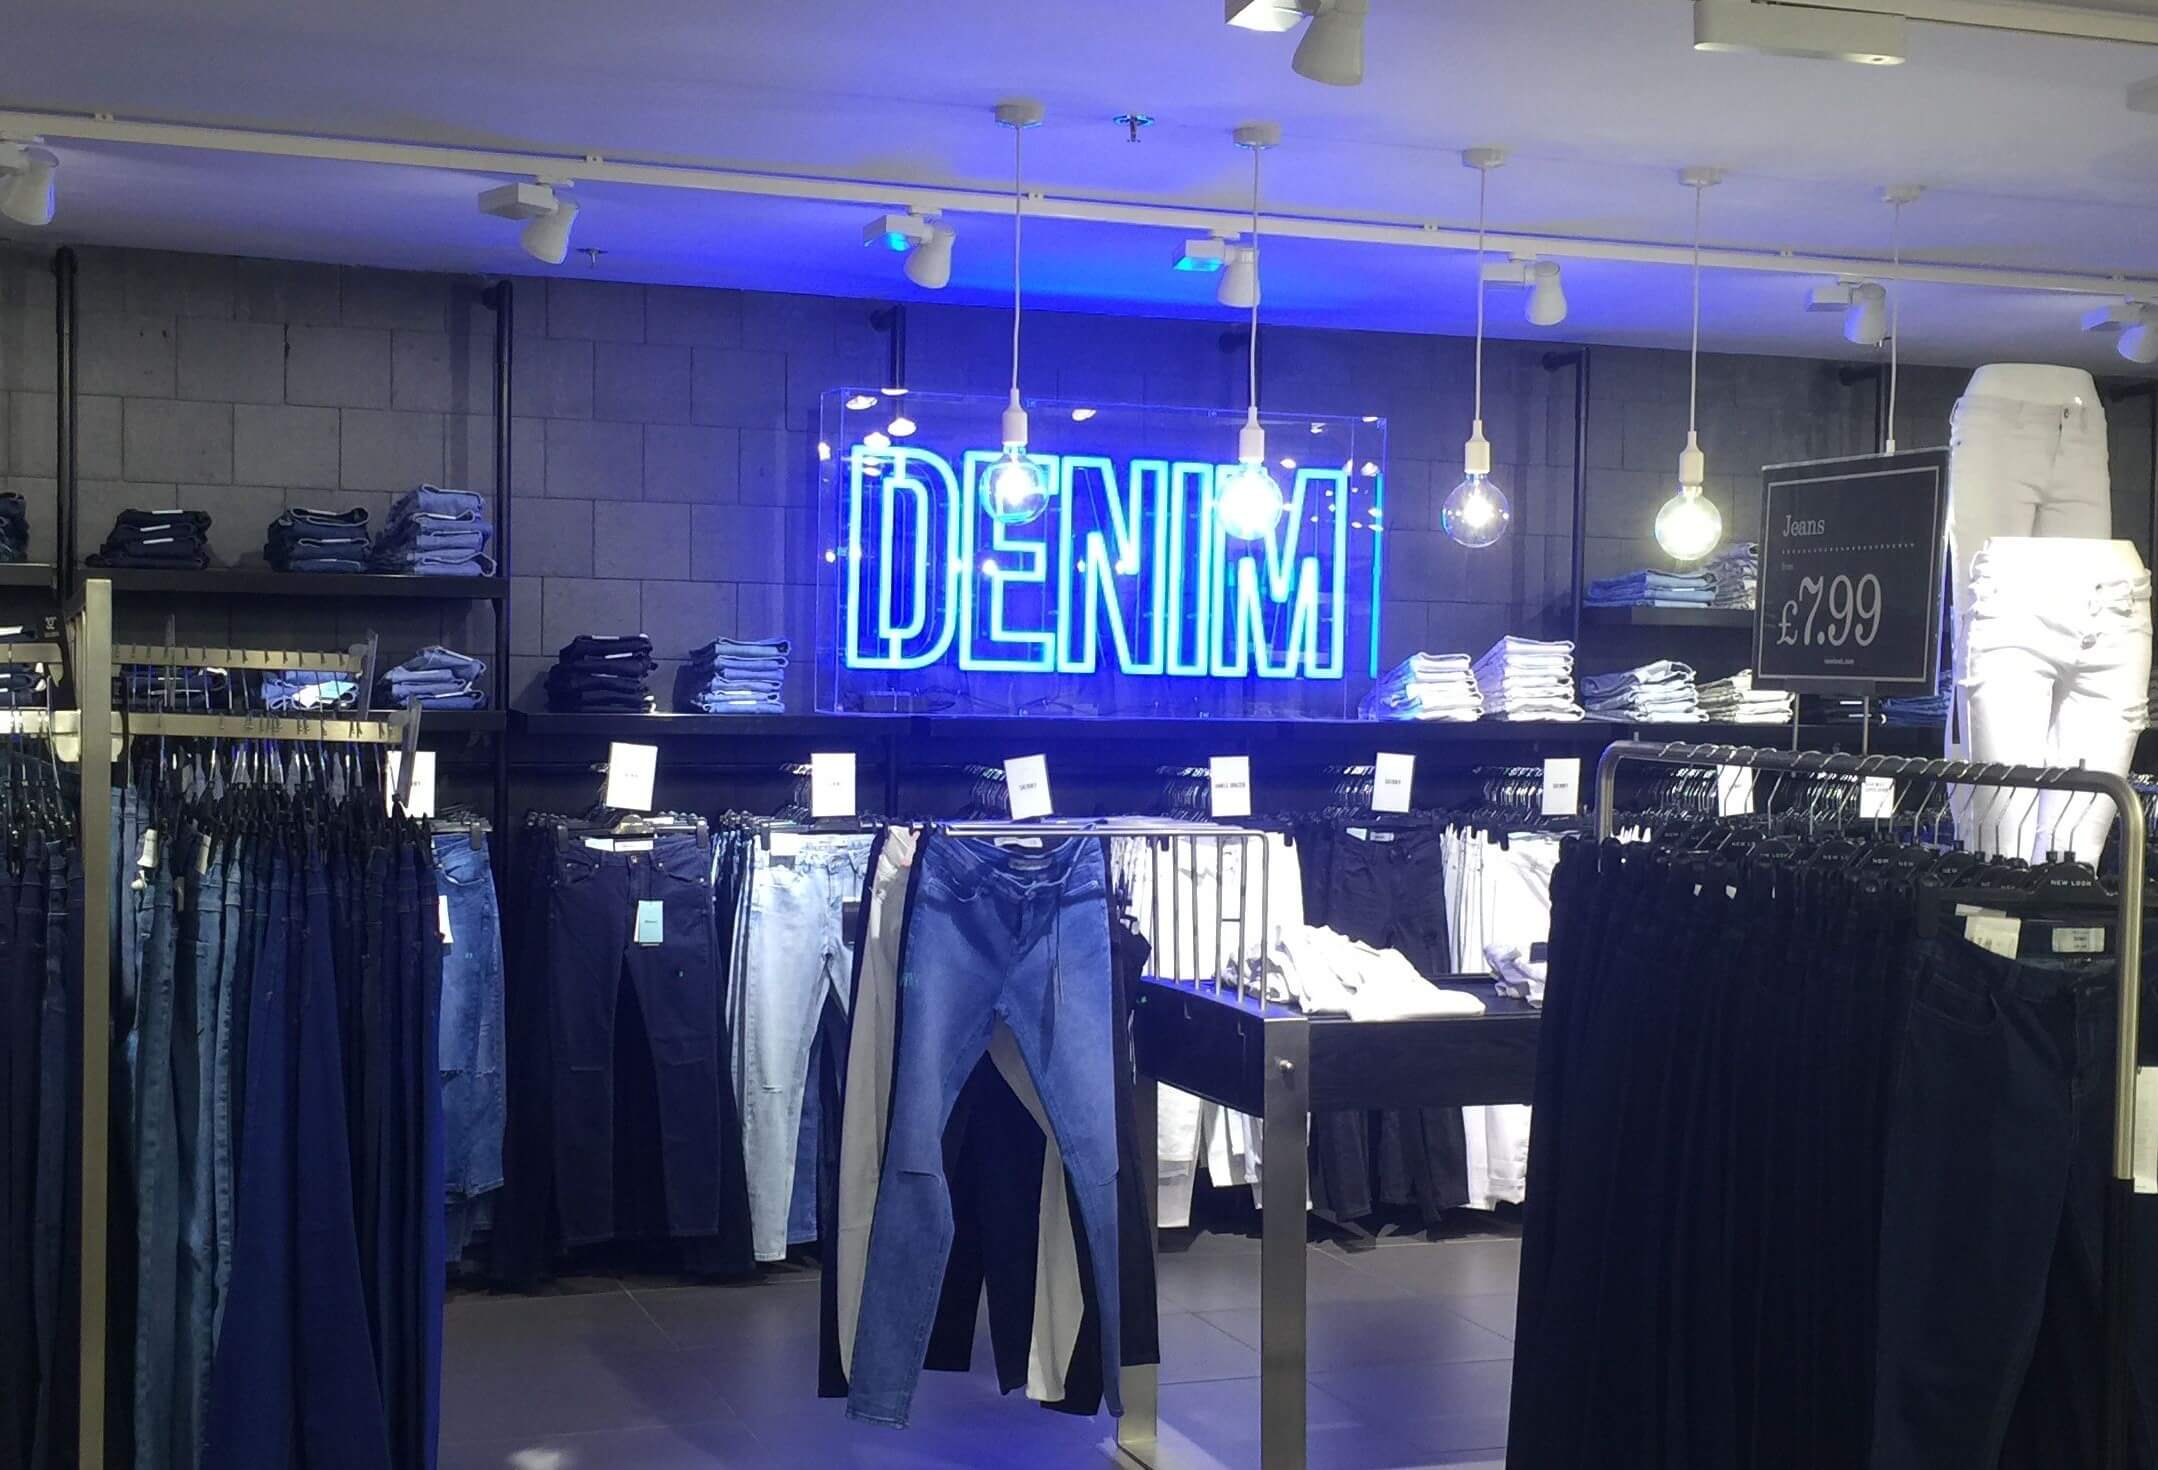 Electric blue neon signs at retail stores